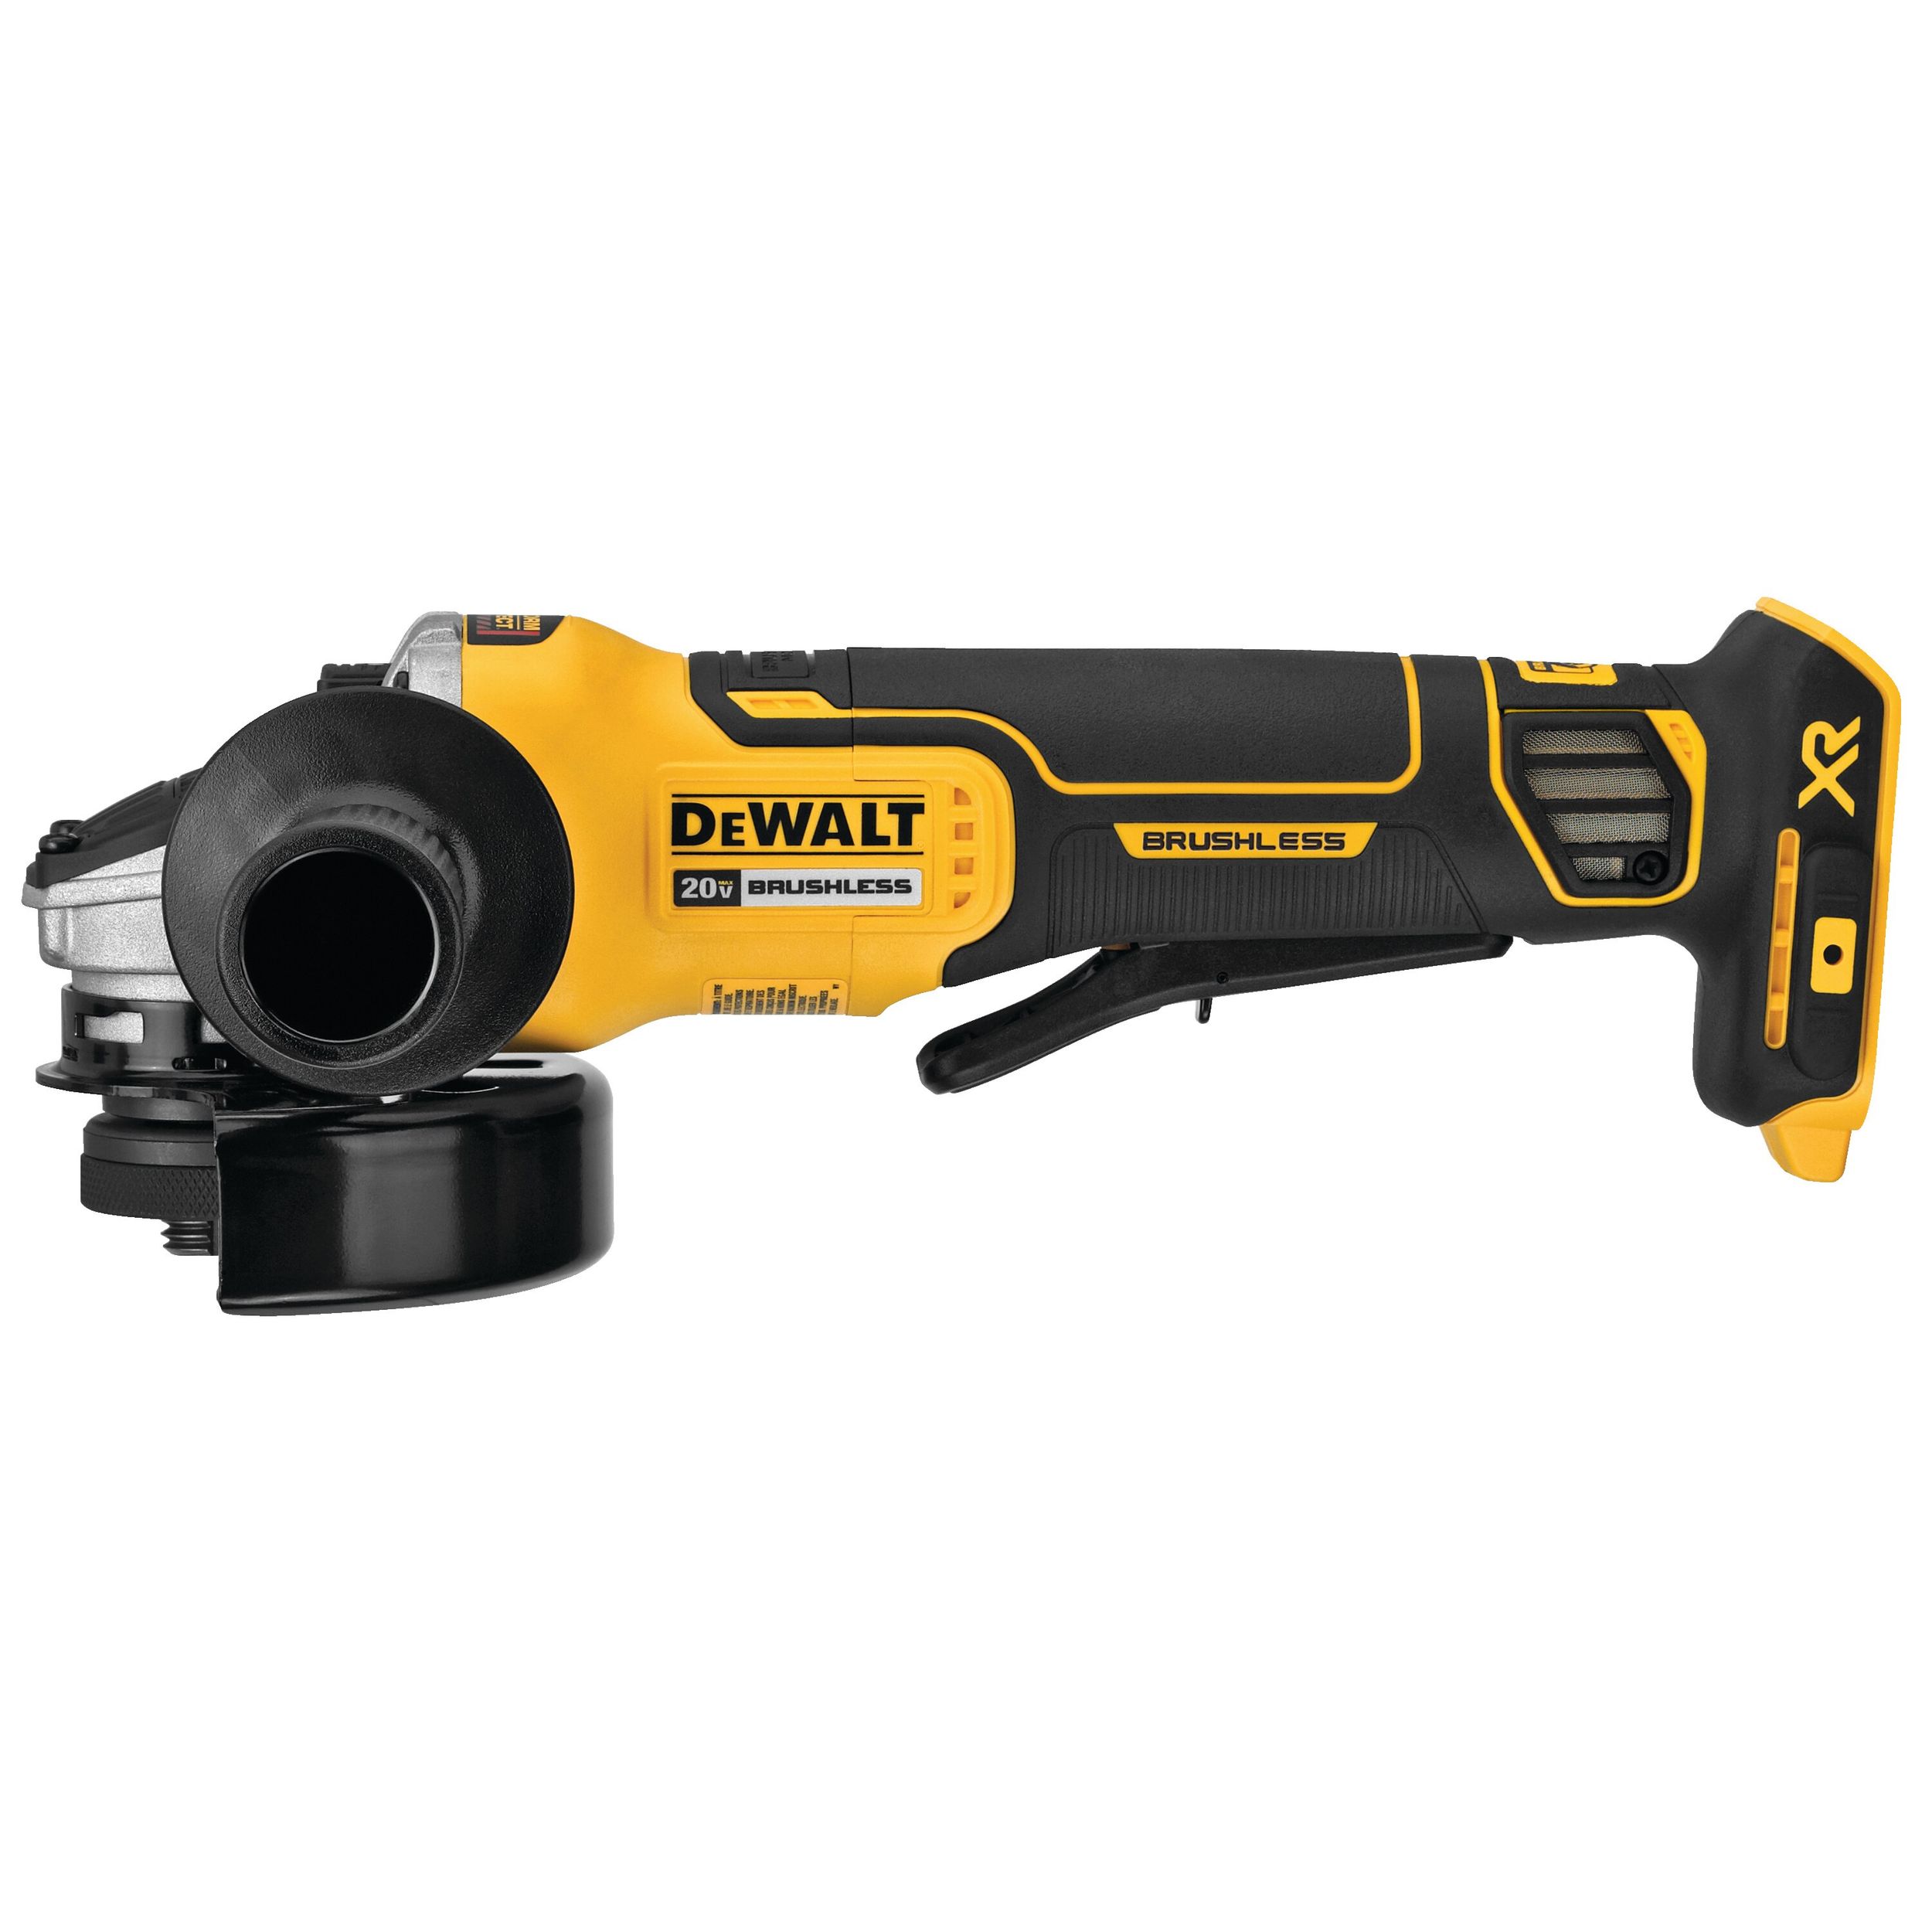 DeWalt - Small angle grinder with paddle switch and anti-shock